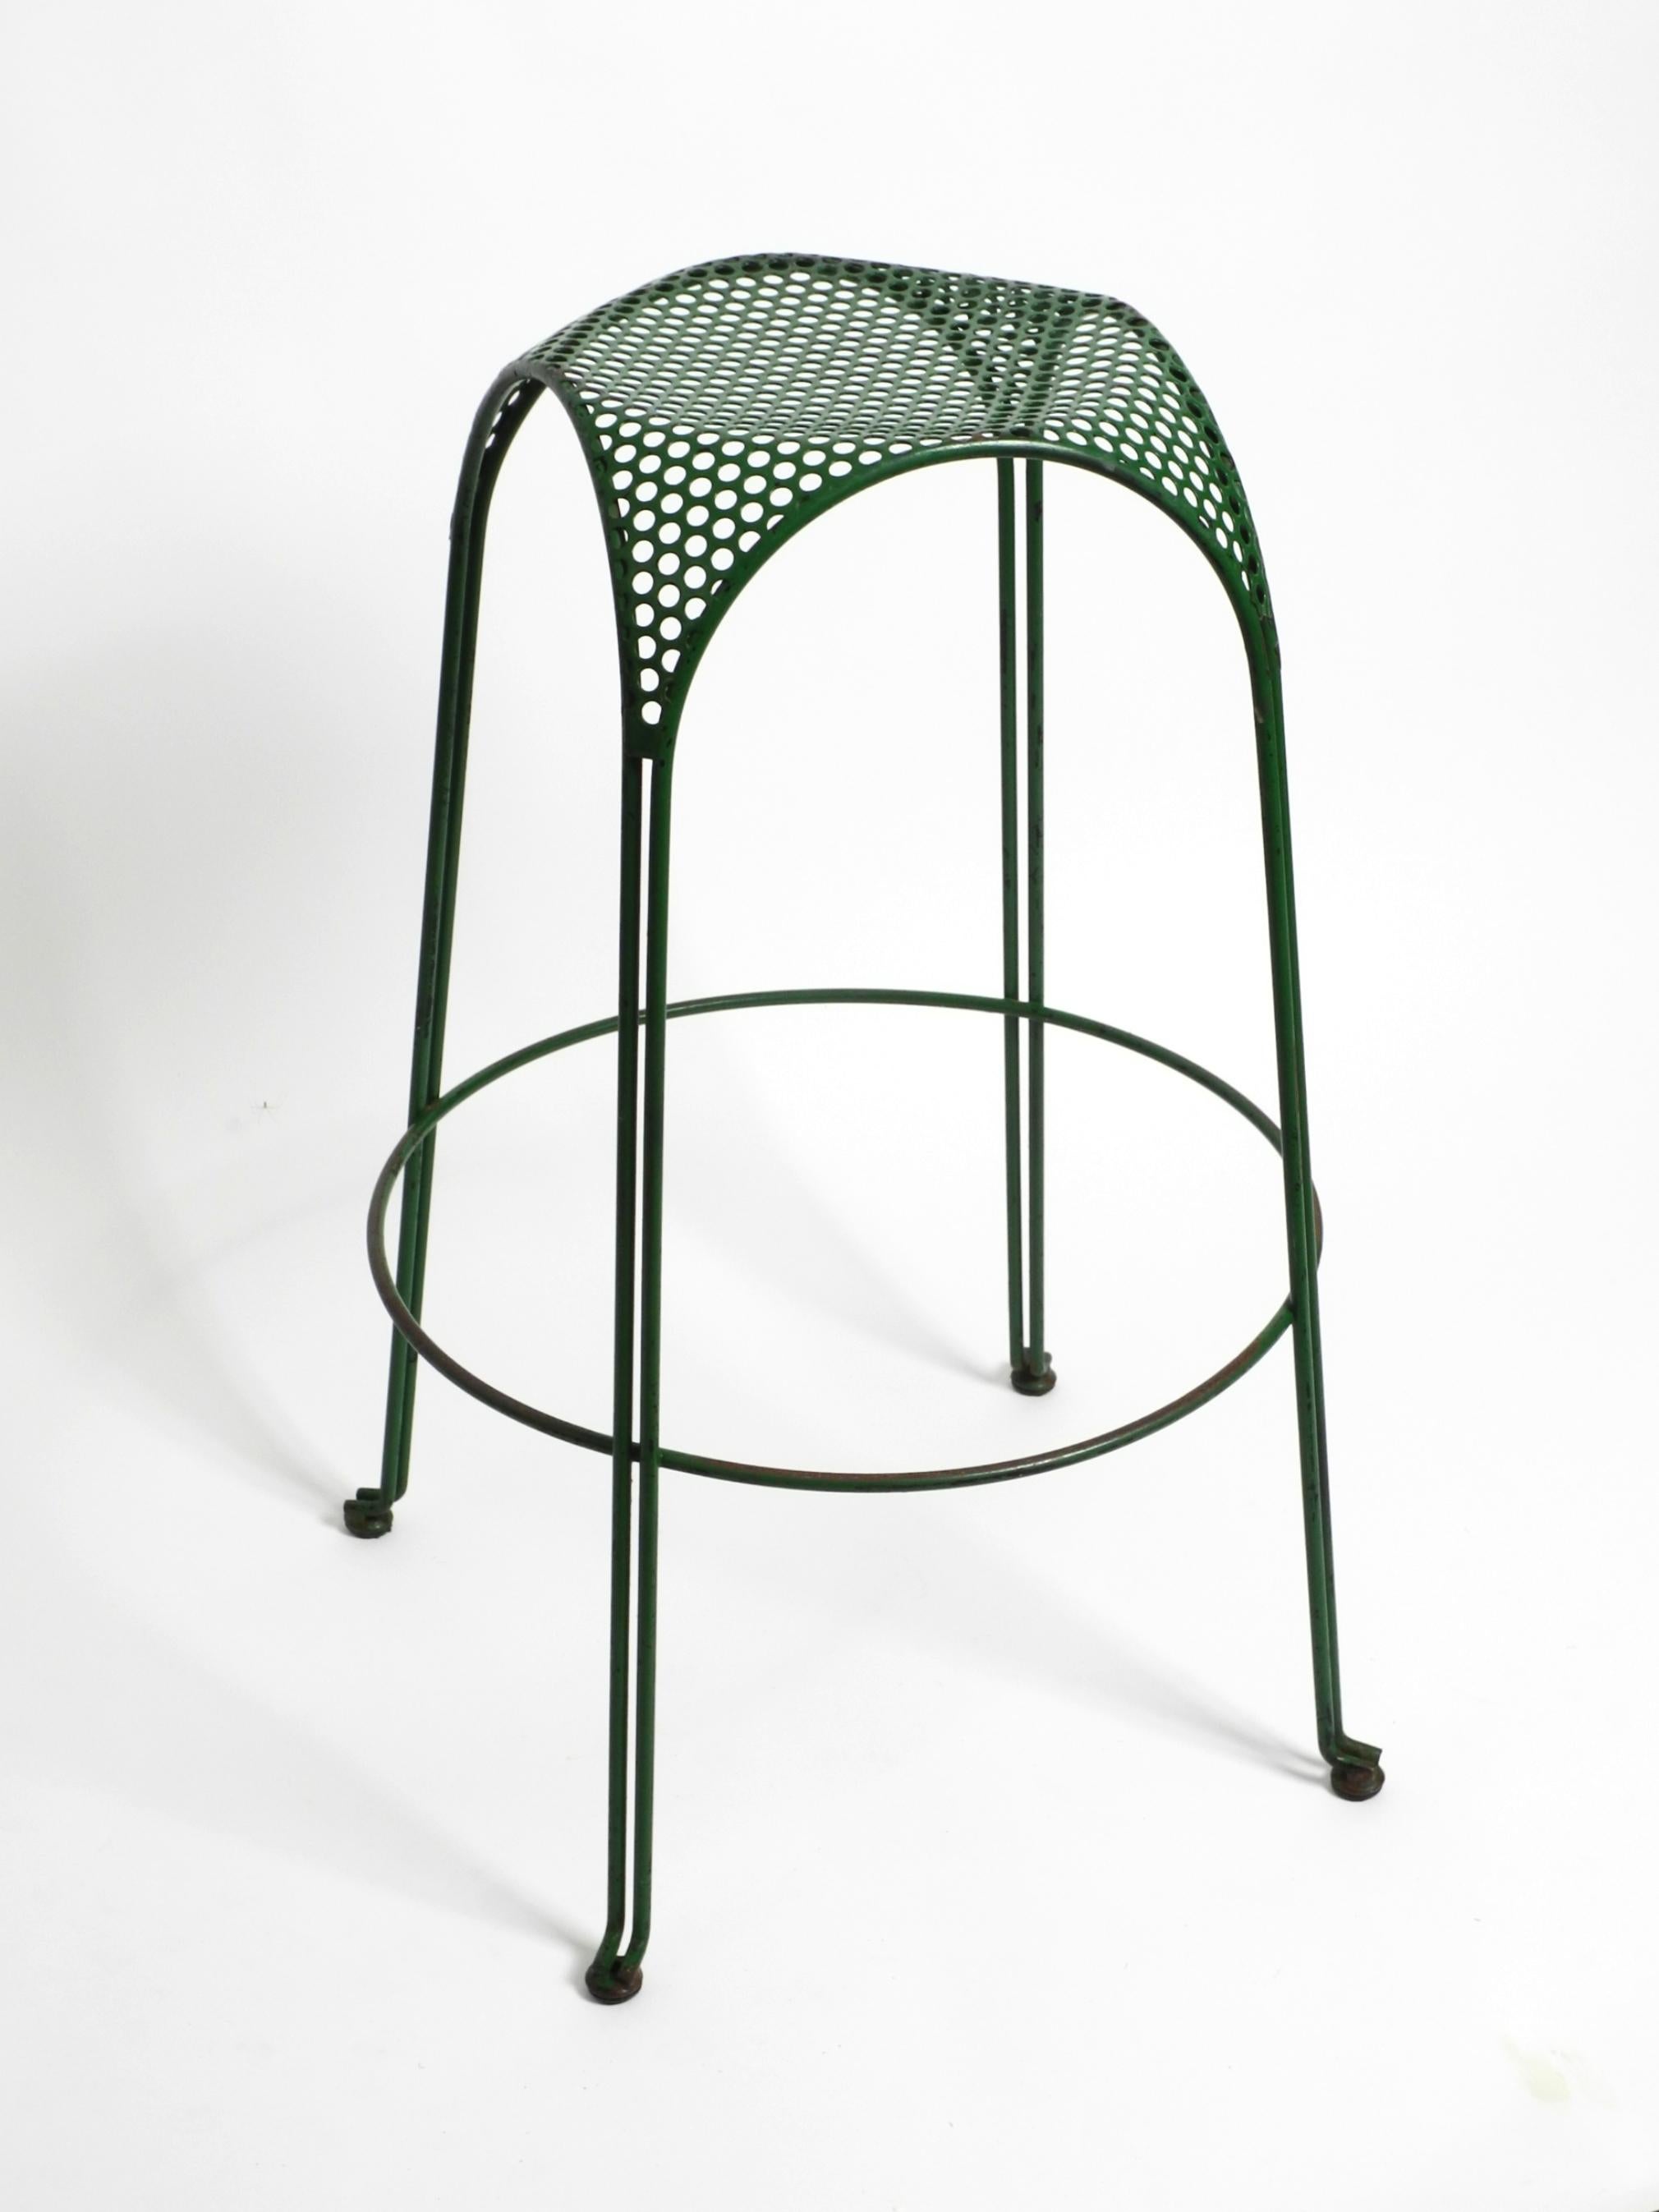 Italian 1960s bar stool made of green painted metal with perforated metal seat For Sale 13